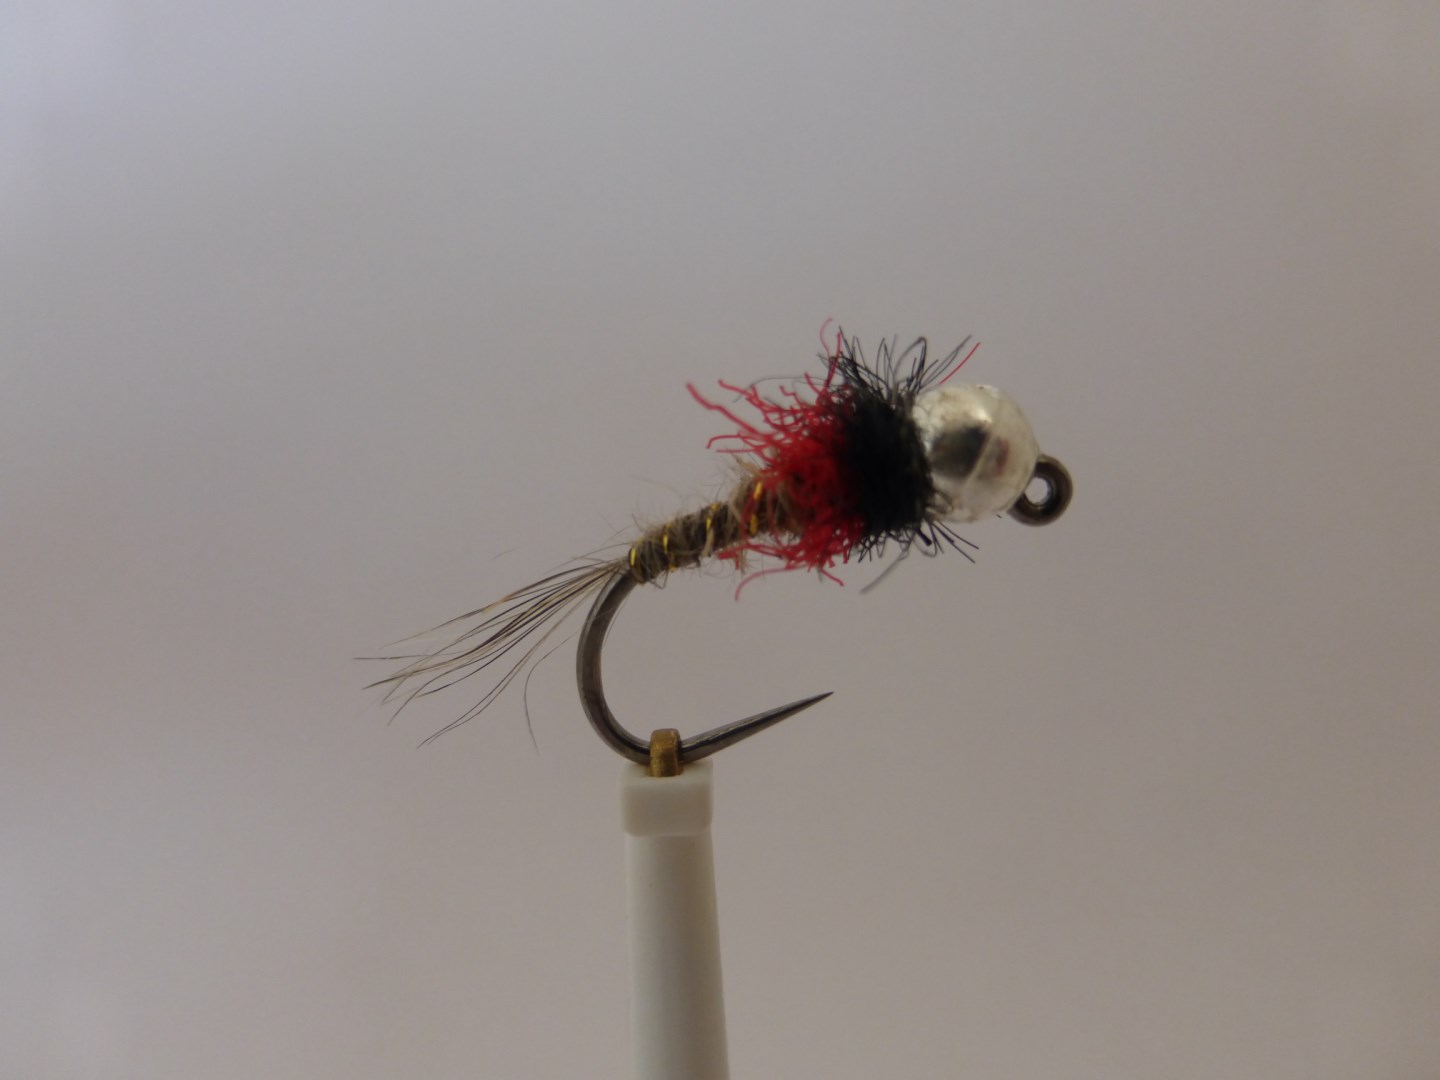 Size 12 Tungsten Hare,s Ear Silver - Barbless